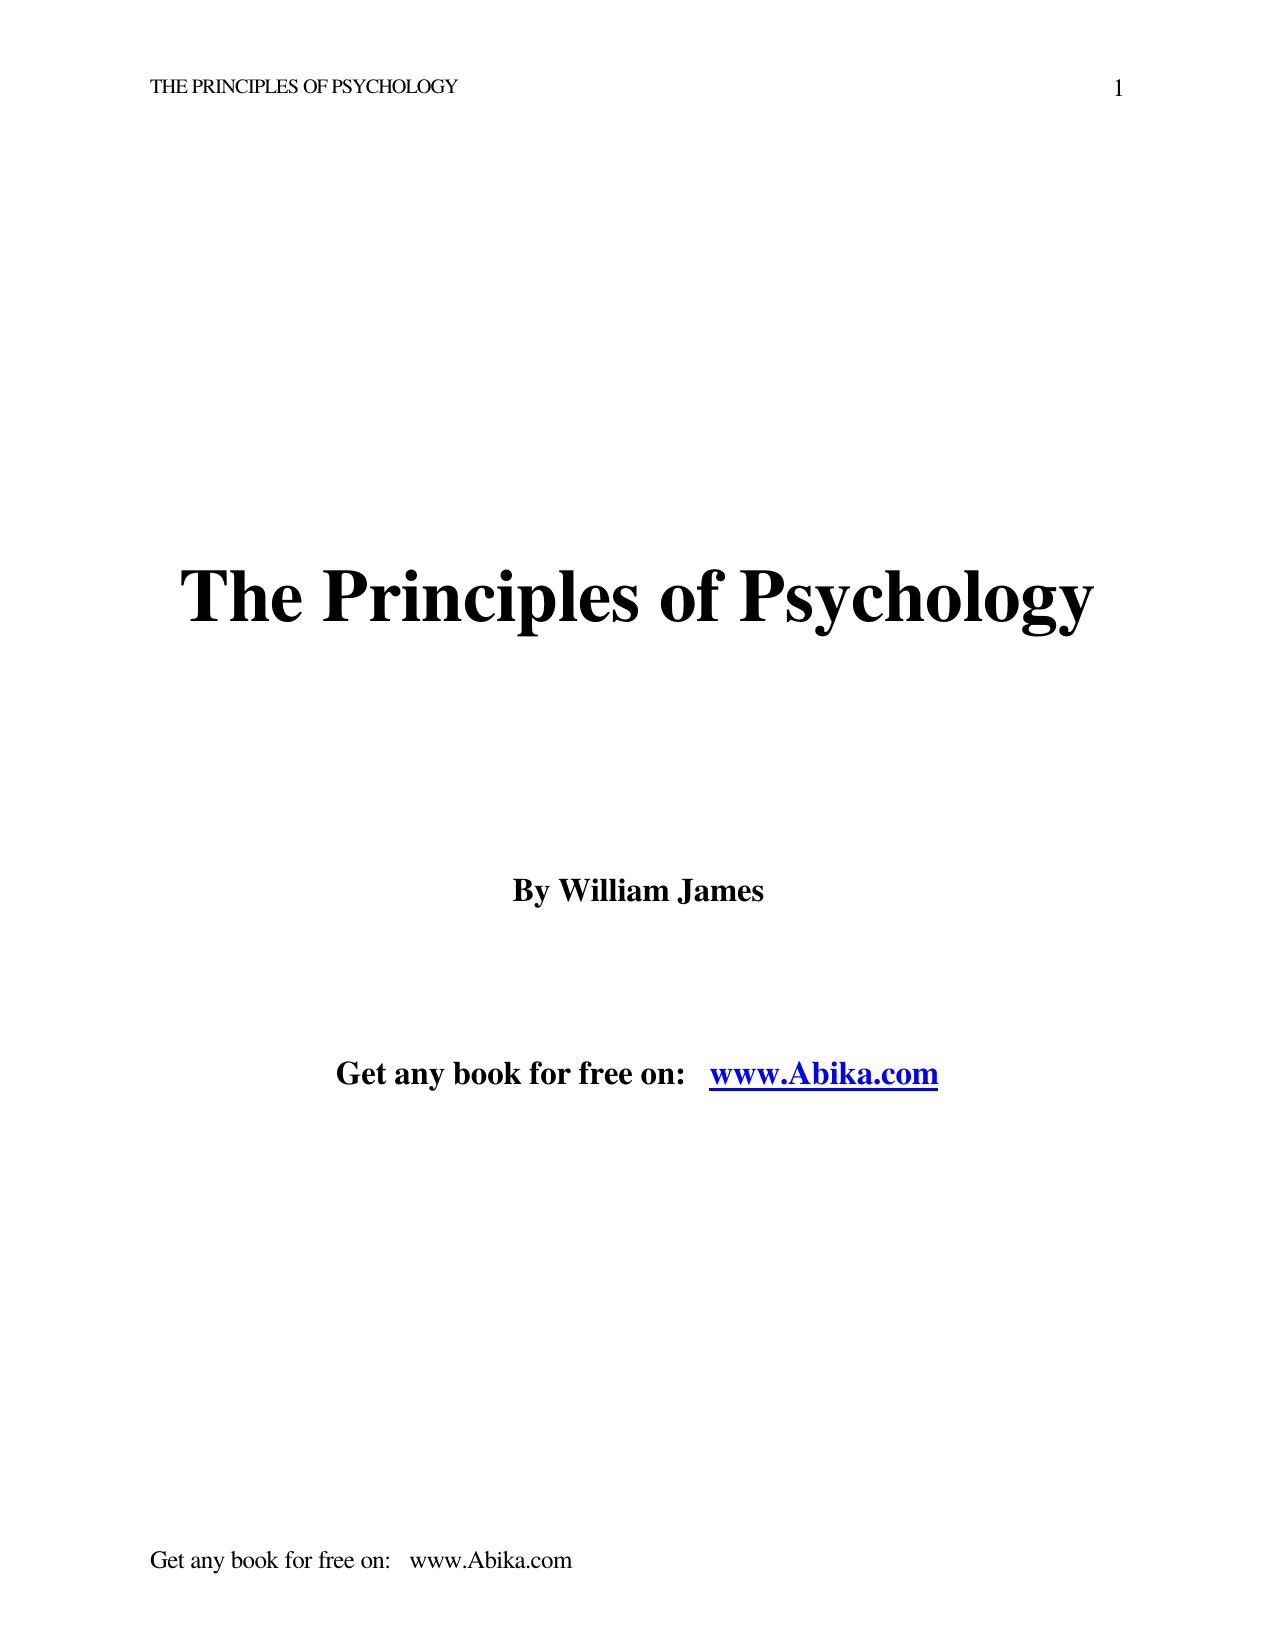 The Principles of Psychology 2 by William James